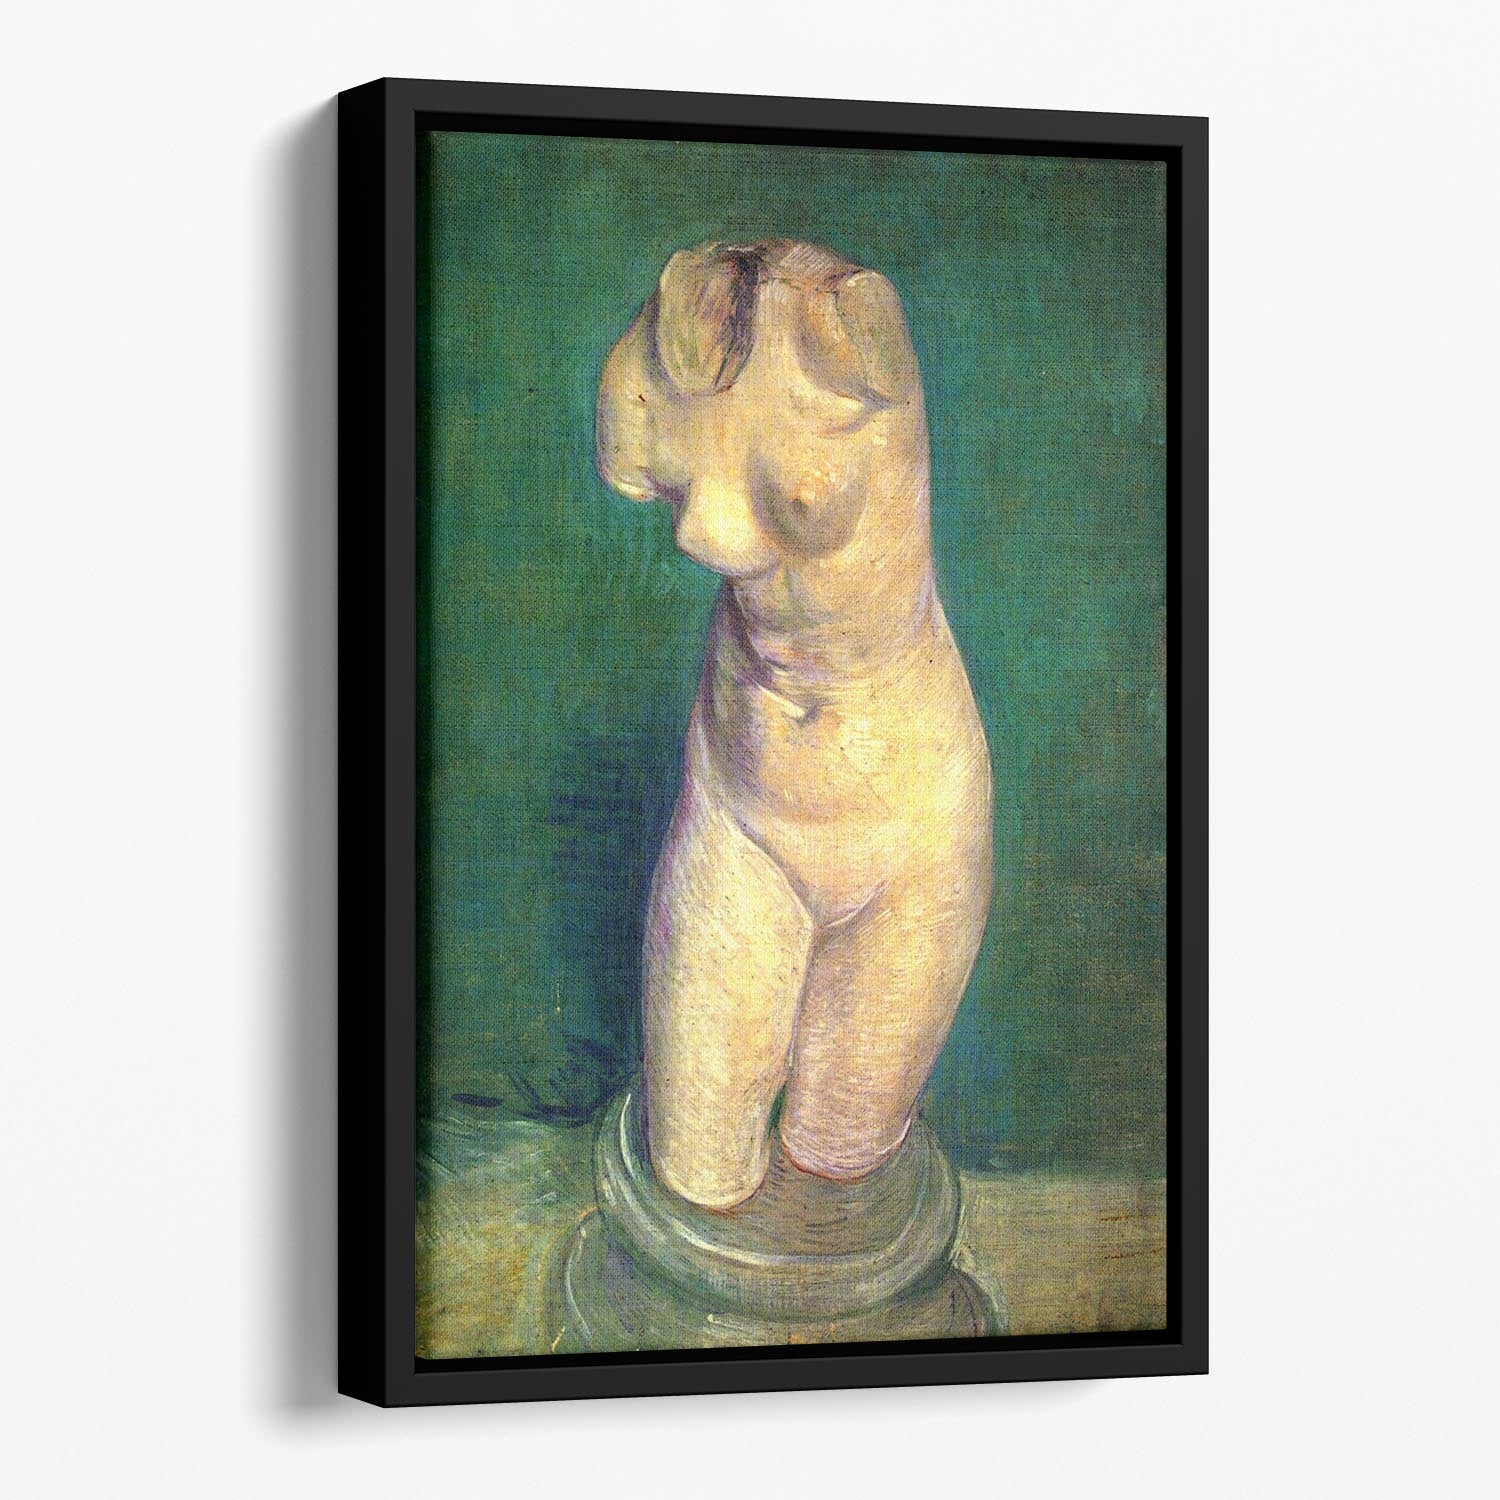 Plaster Statuette of a Female Torso by Van Gogh Floating Framed Canvas